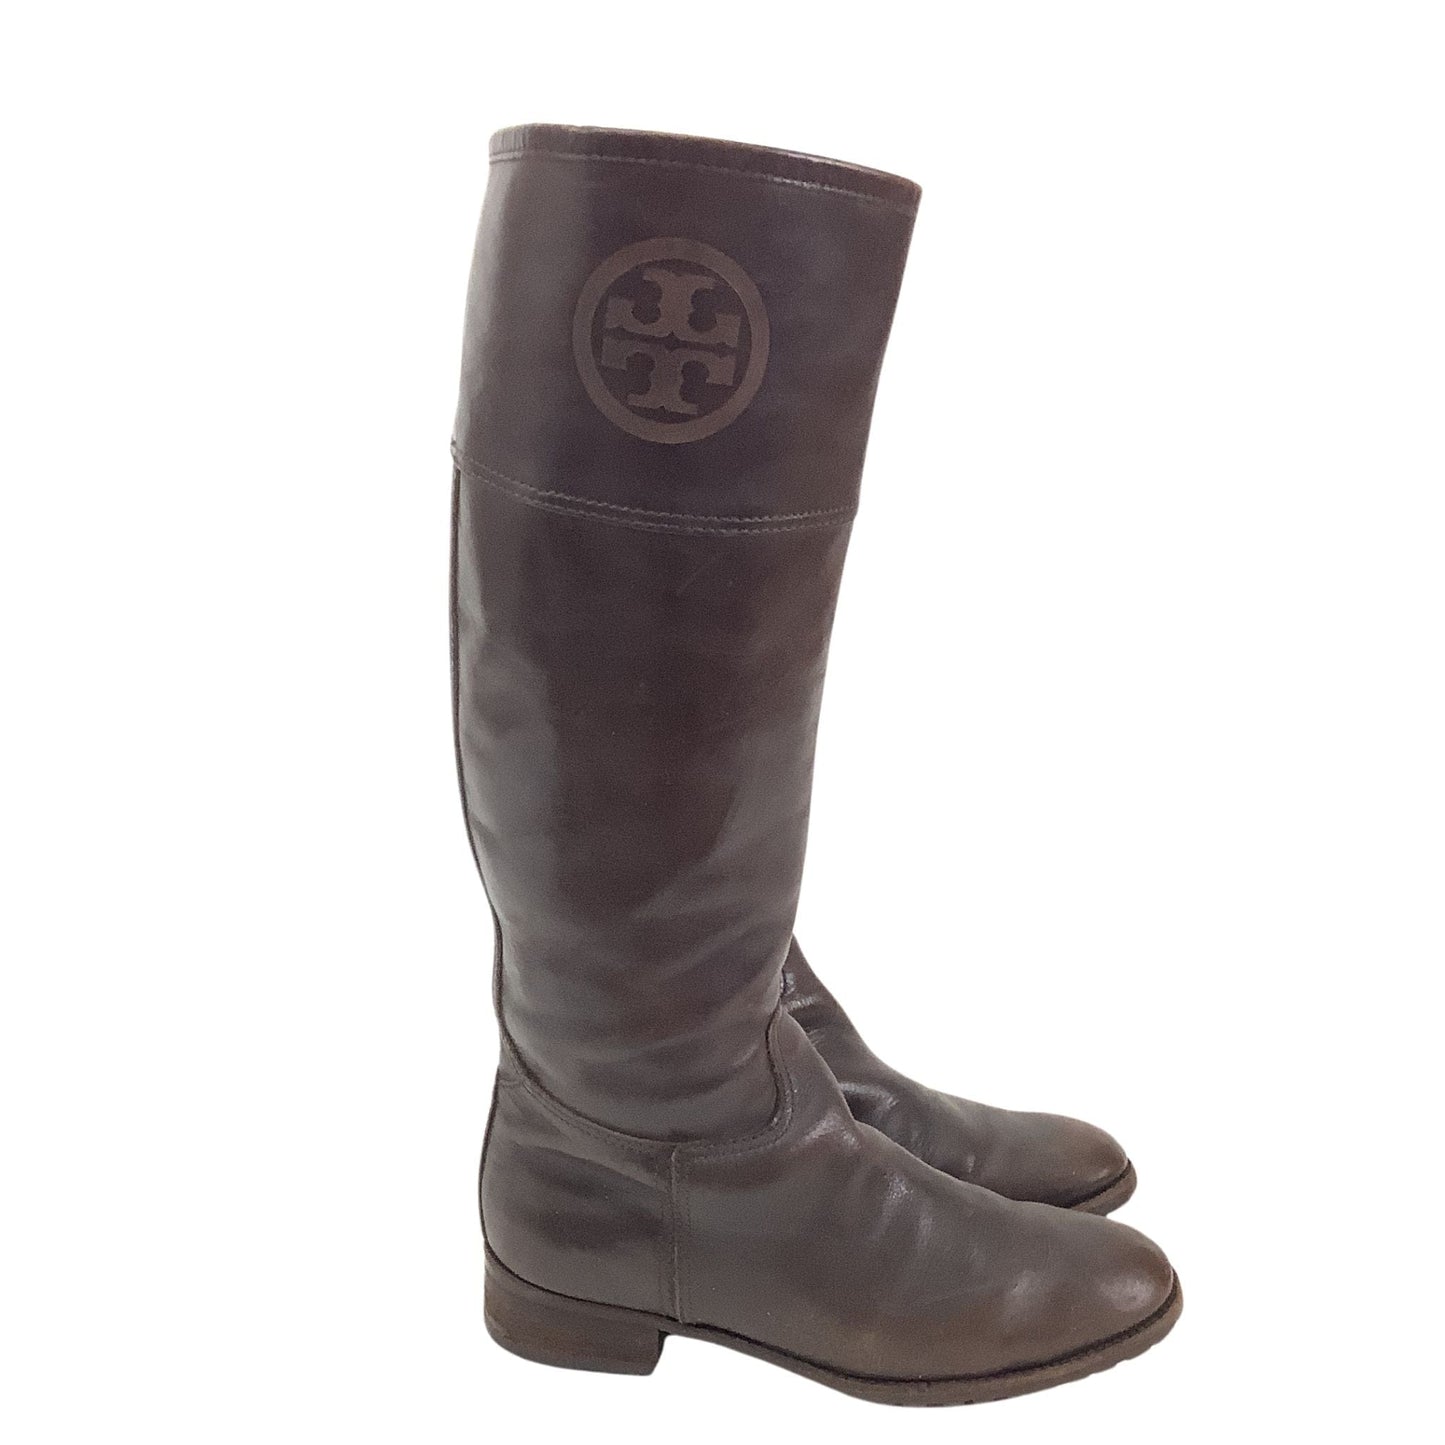 Tory Burch Equestrian Boots 7.5 / Brown / Y2K - Now